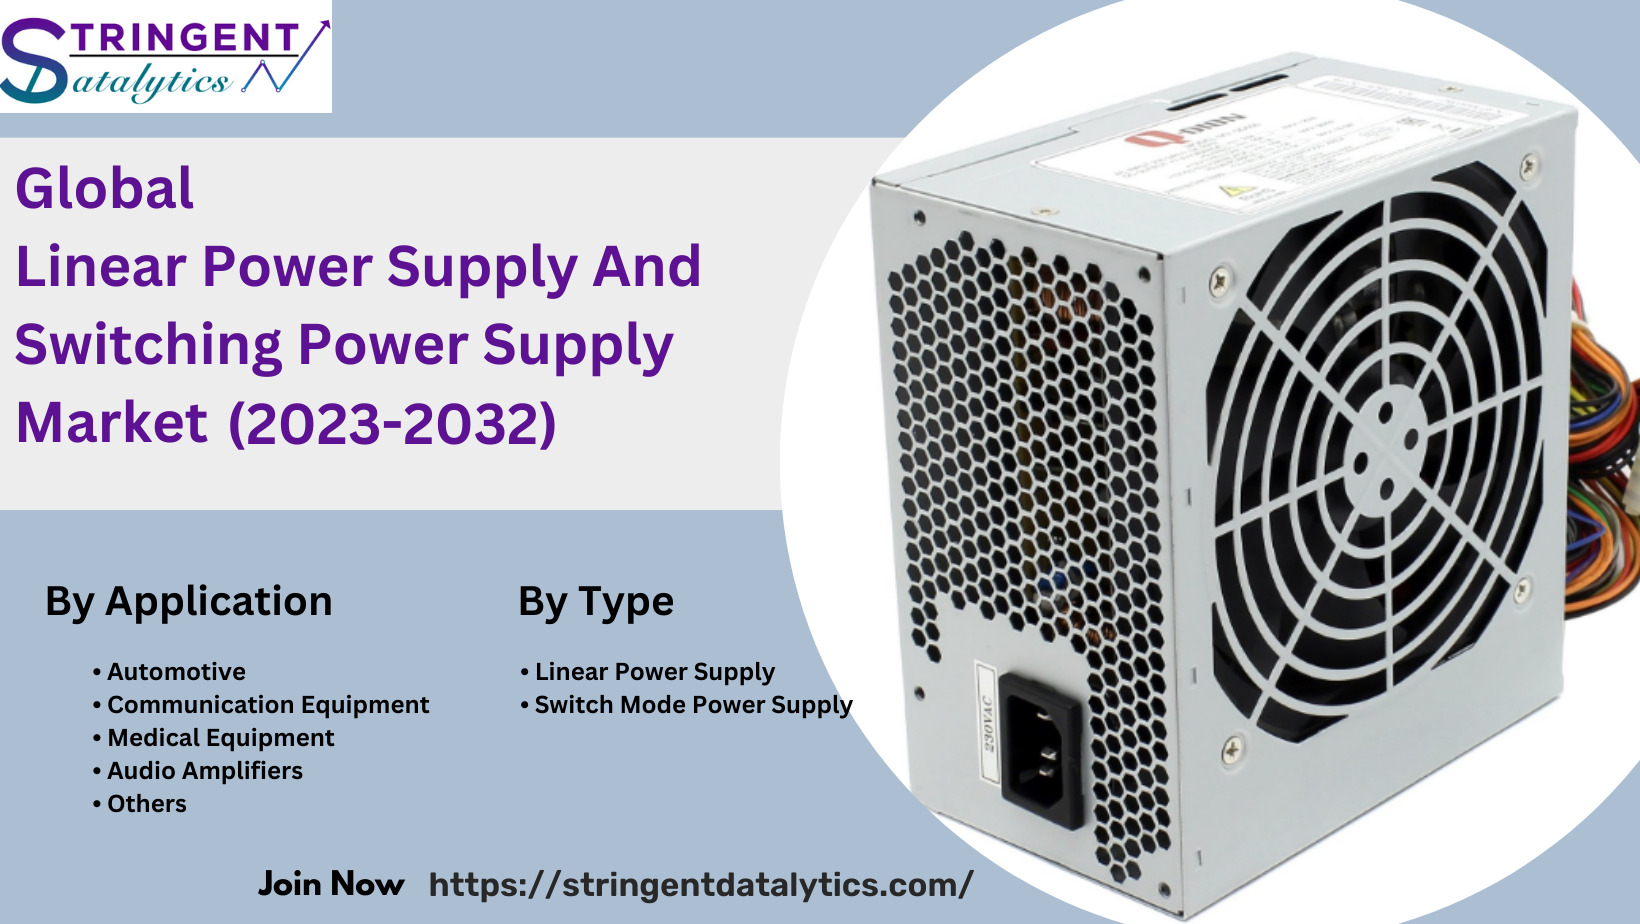 Linear Power Supply and Switching Power Supply Market